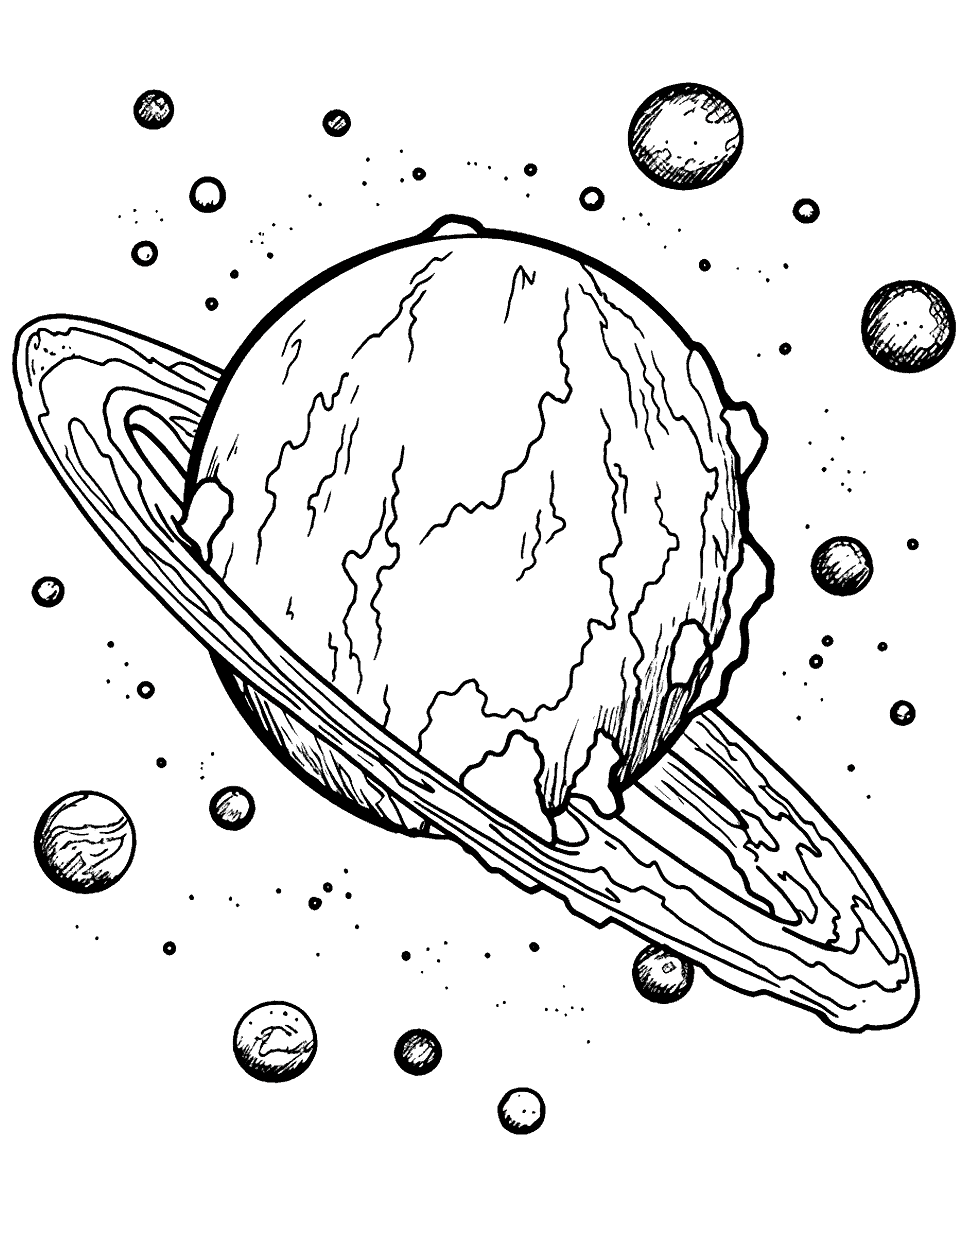 Asteroid Impacted Earth Solar System Coloring Page - View of tattered earth after an asteroid hit from outer space.